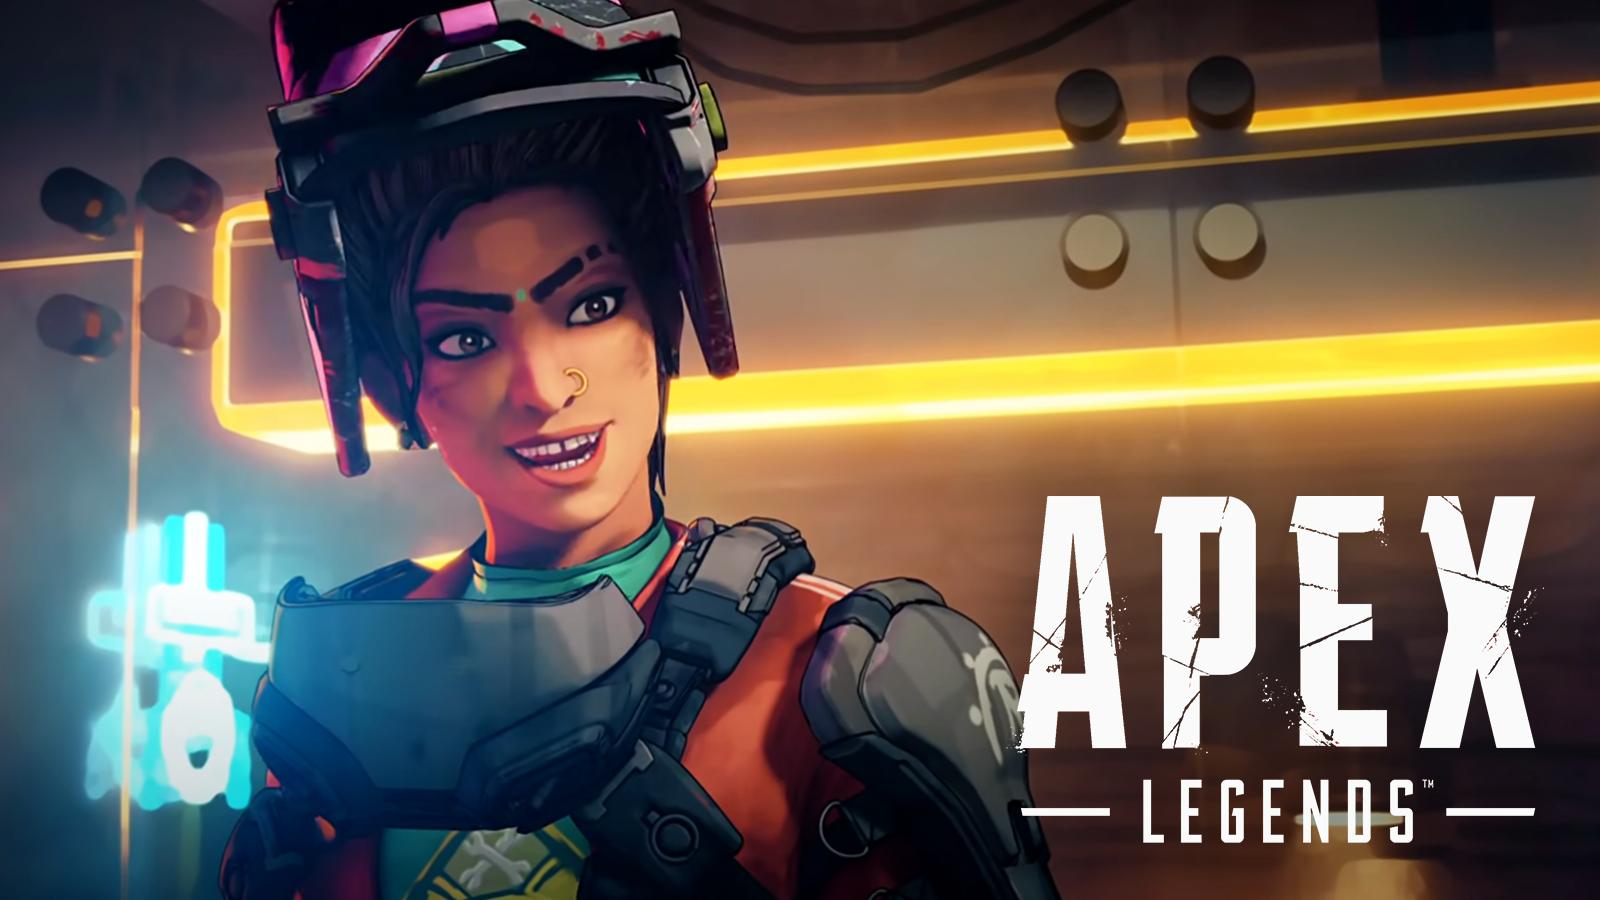 Cross Progression is Coming to Apex! But it isn't Good…